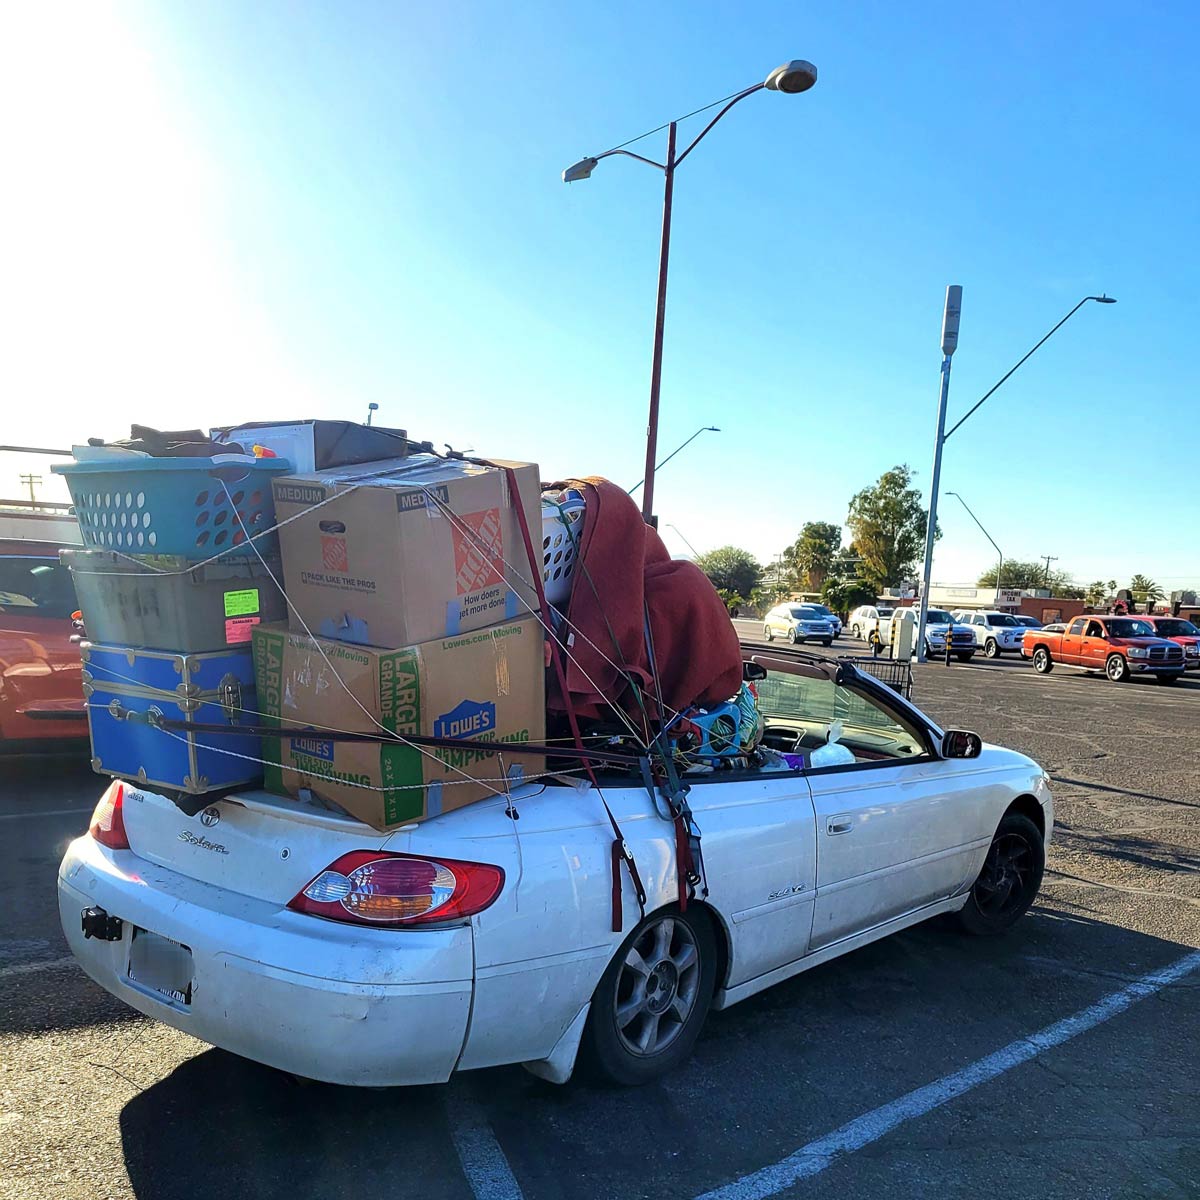 Who needs a moving truck anyway?